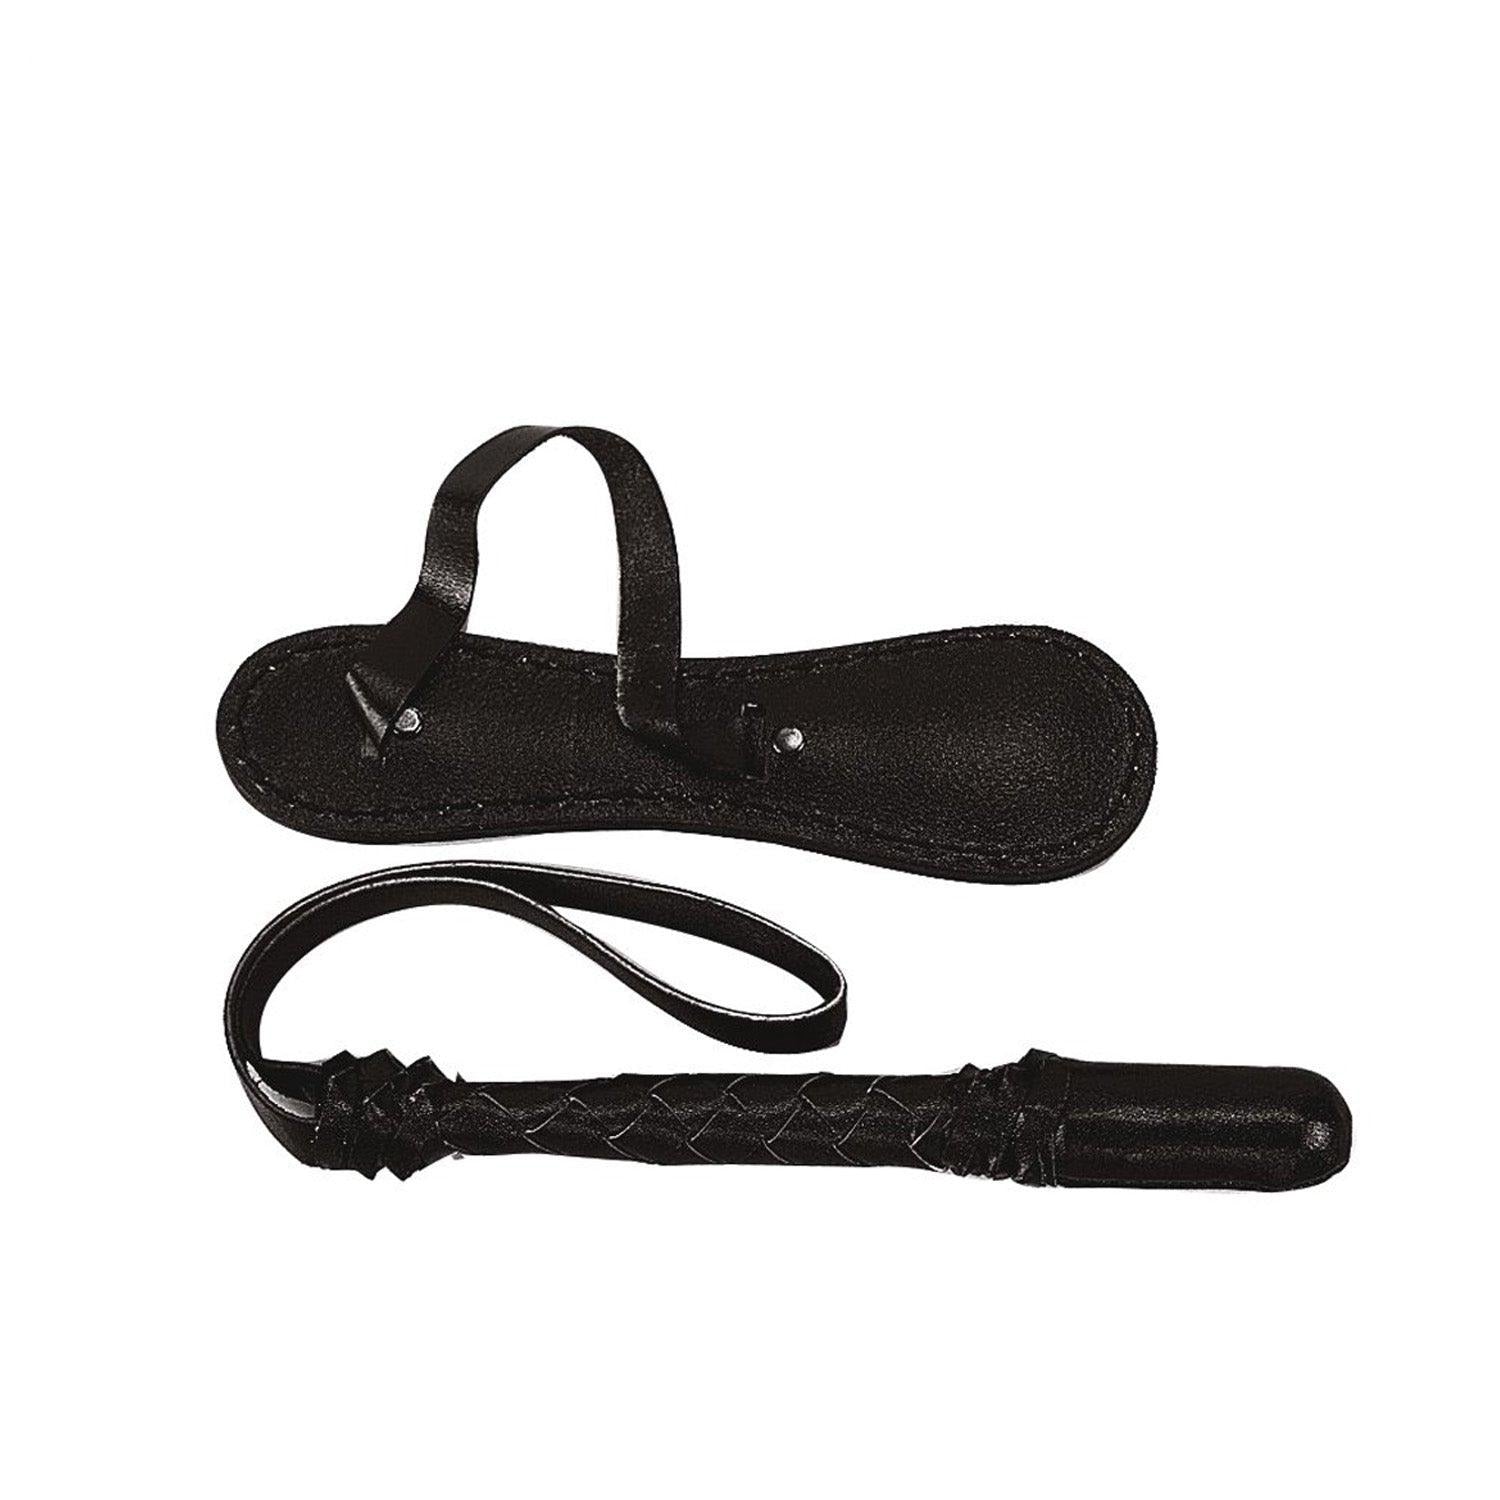 Rothco Billy Club With Wrist Strap - Tactical Choice Plus